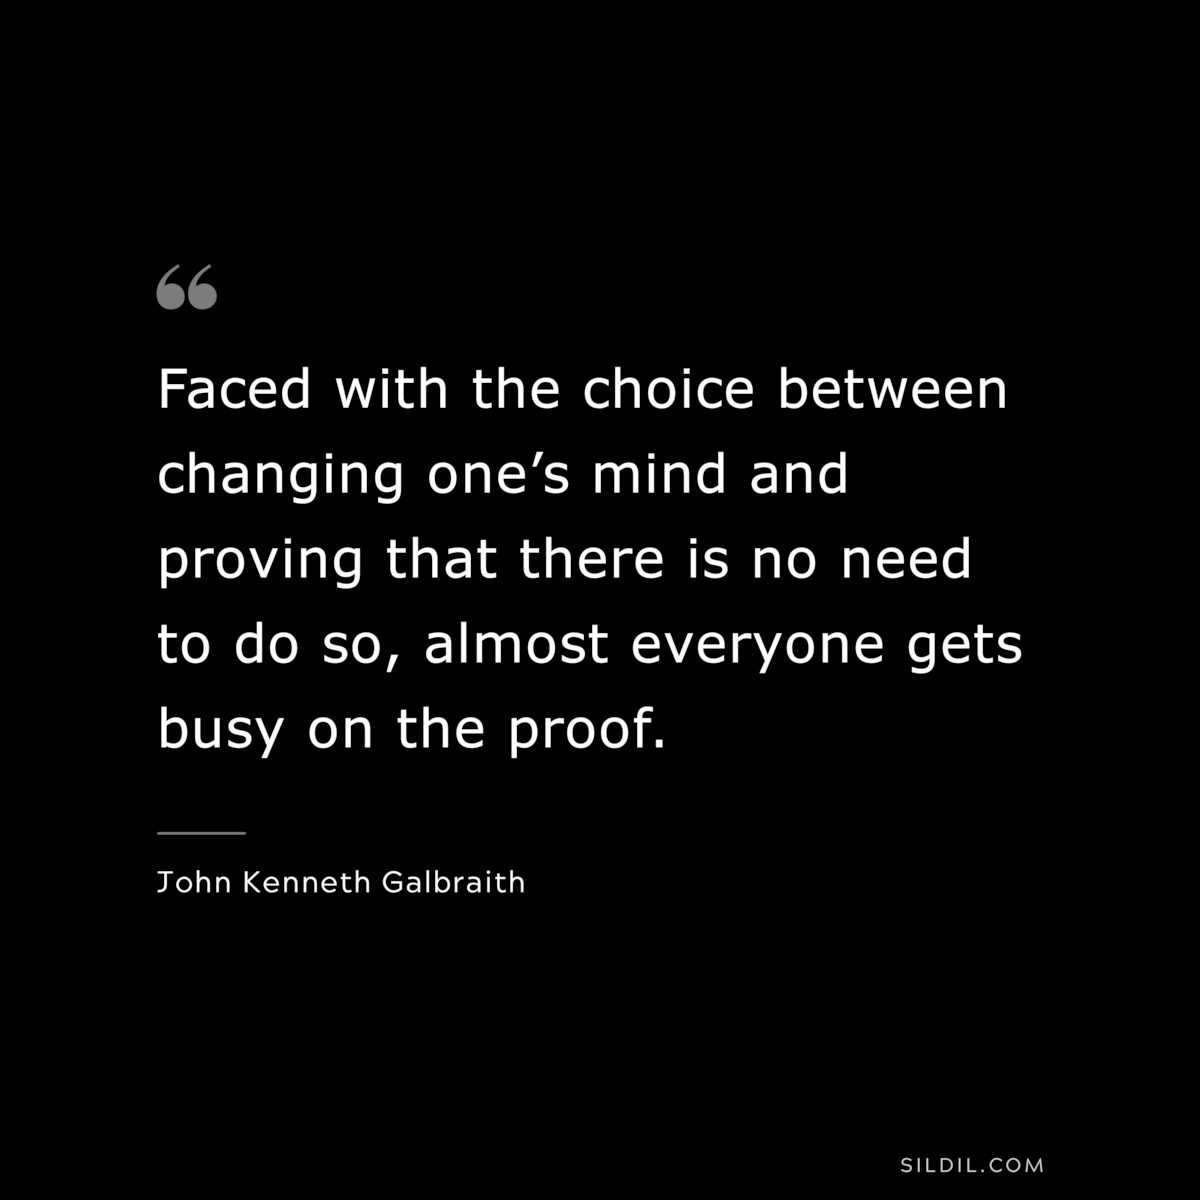 Faced with the choice between changing one’s mind and proving that there is no need to do so, almost everyone gets busy on the proof. ― John Kenneth Galbraith